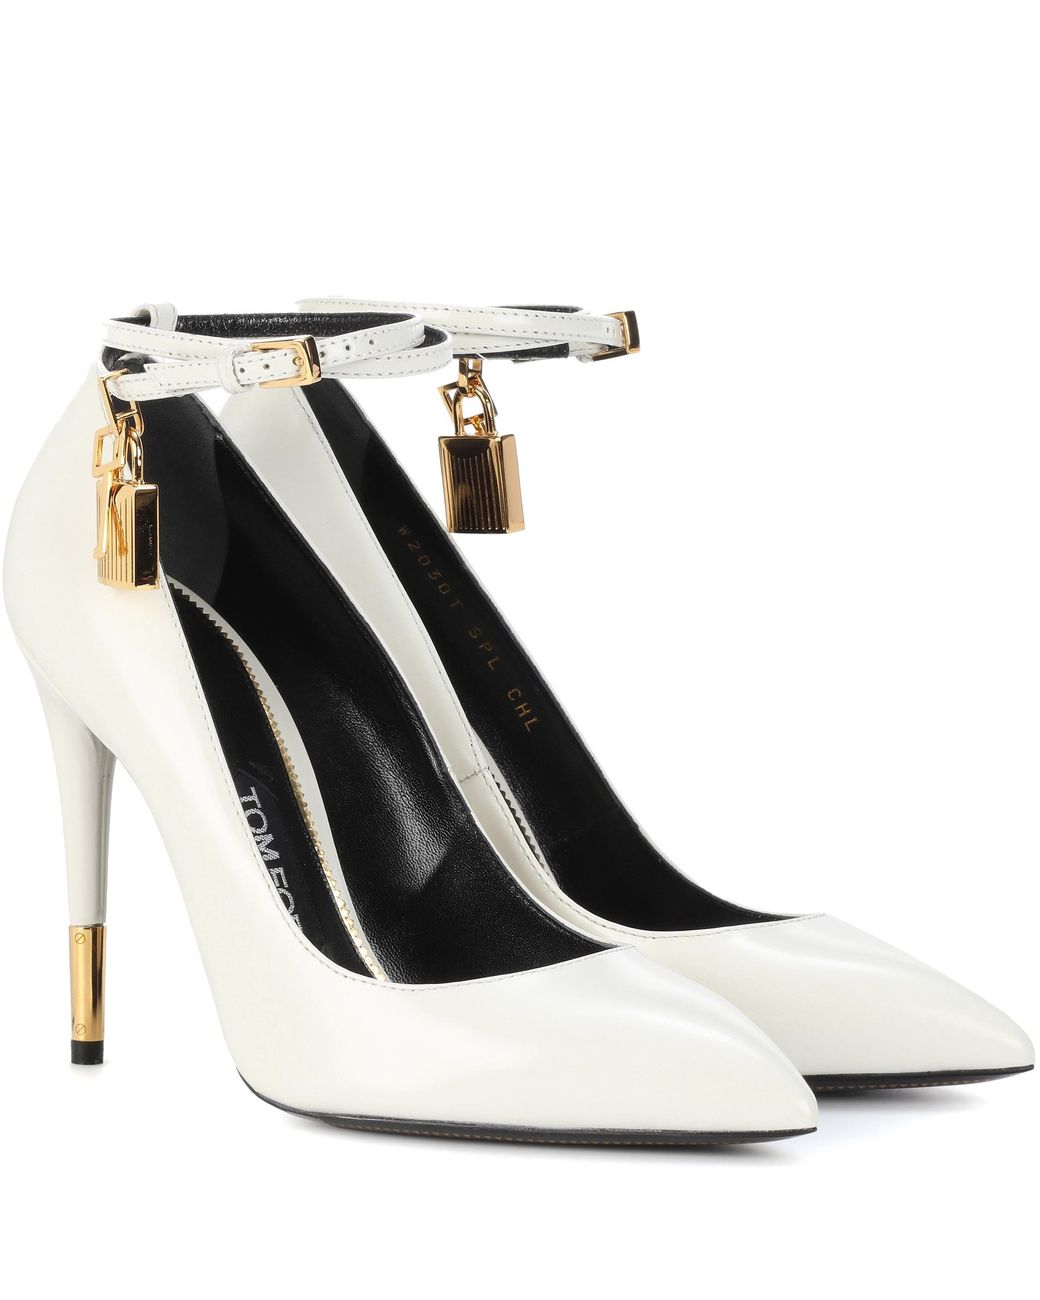 Tom Ford Padlock Leather Pumps in White | Lyst